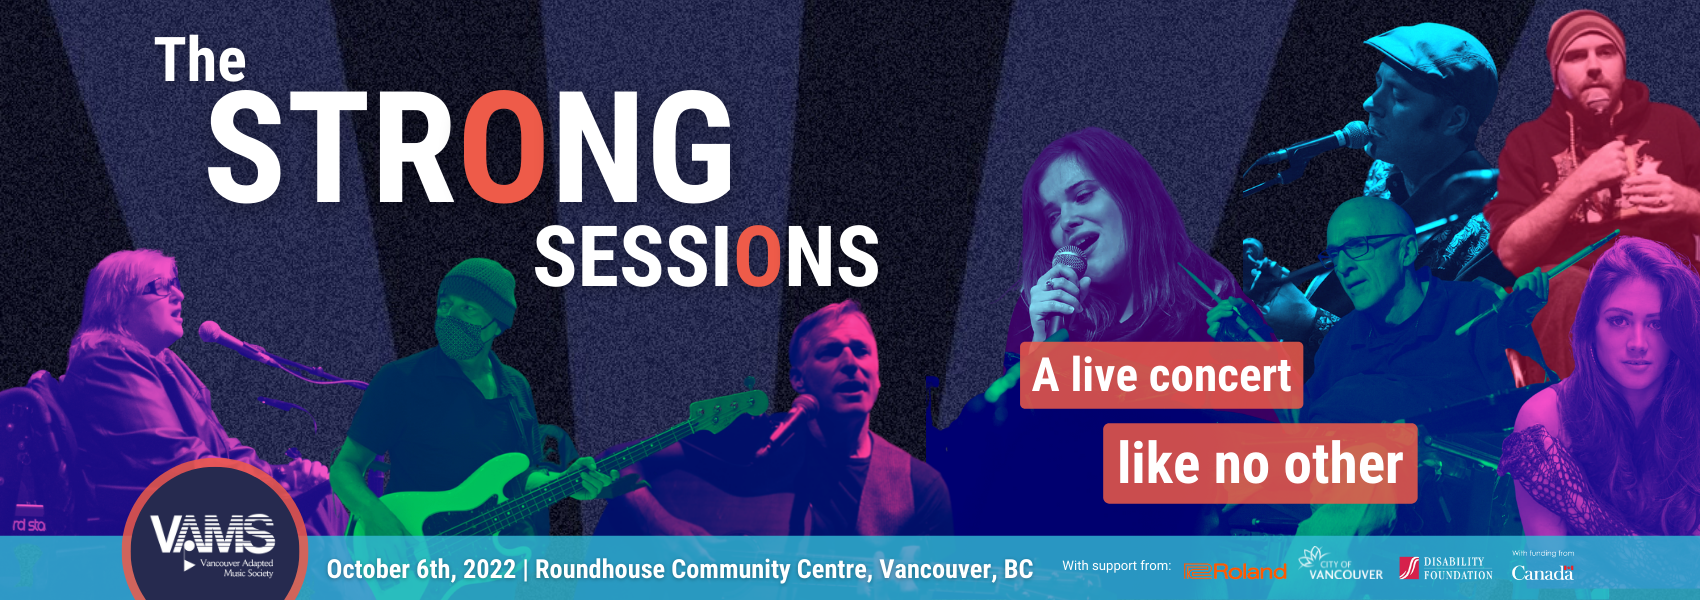 VAMS musicians performing. The Strong Sessions, a live concert like no other. October 6th, 2022. RoundHouse Community Centre, Vancouver.